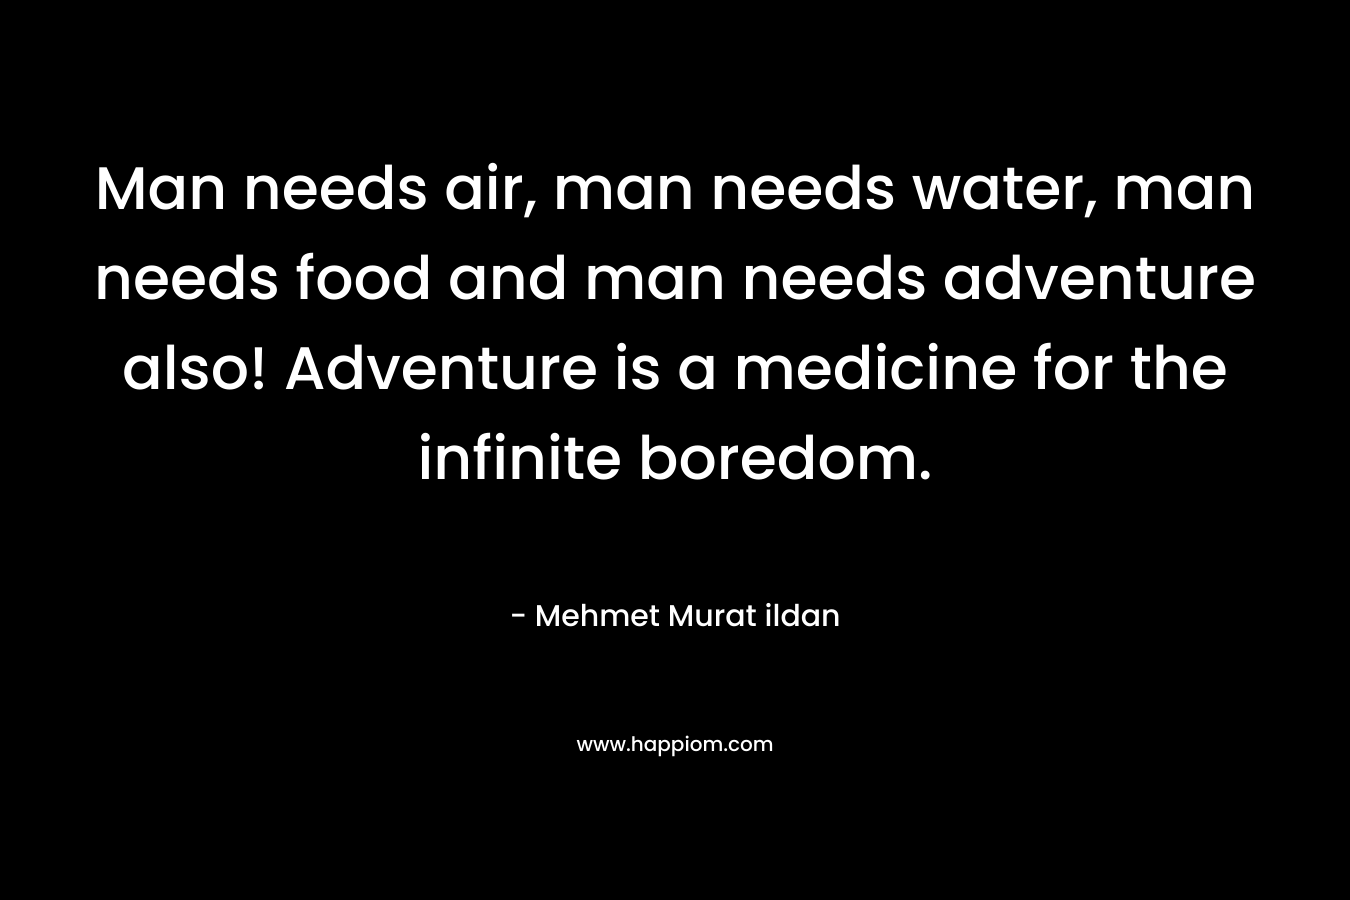 Man needs air, man needs water, man needs food and man needs adventure also! Adventure is a medicine for the infinite boredom.